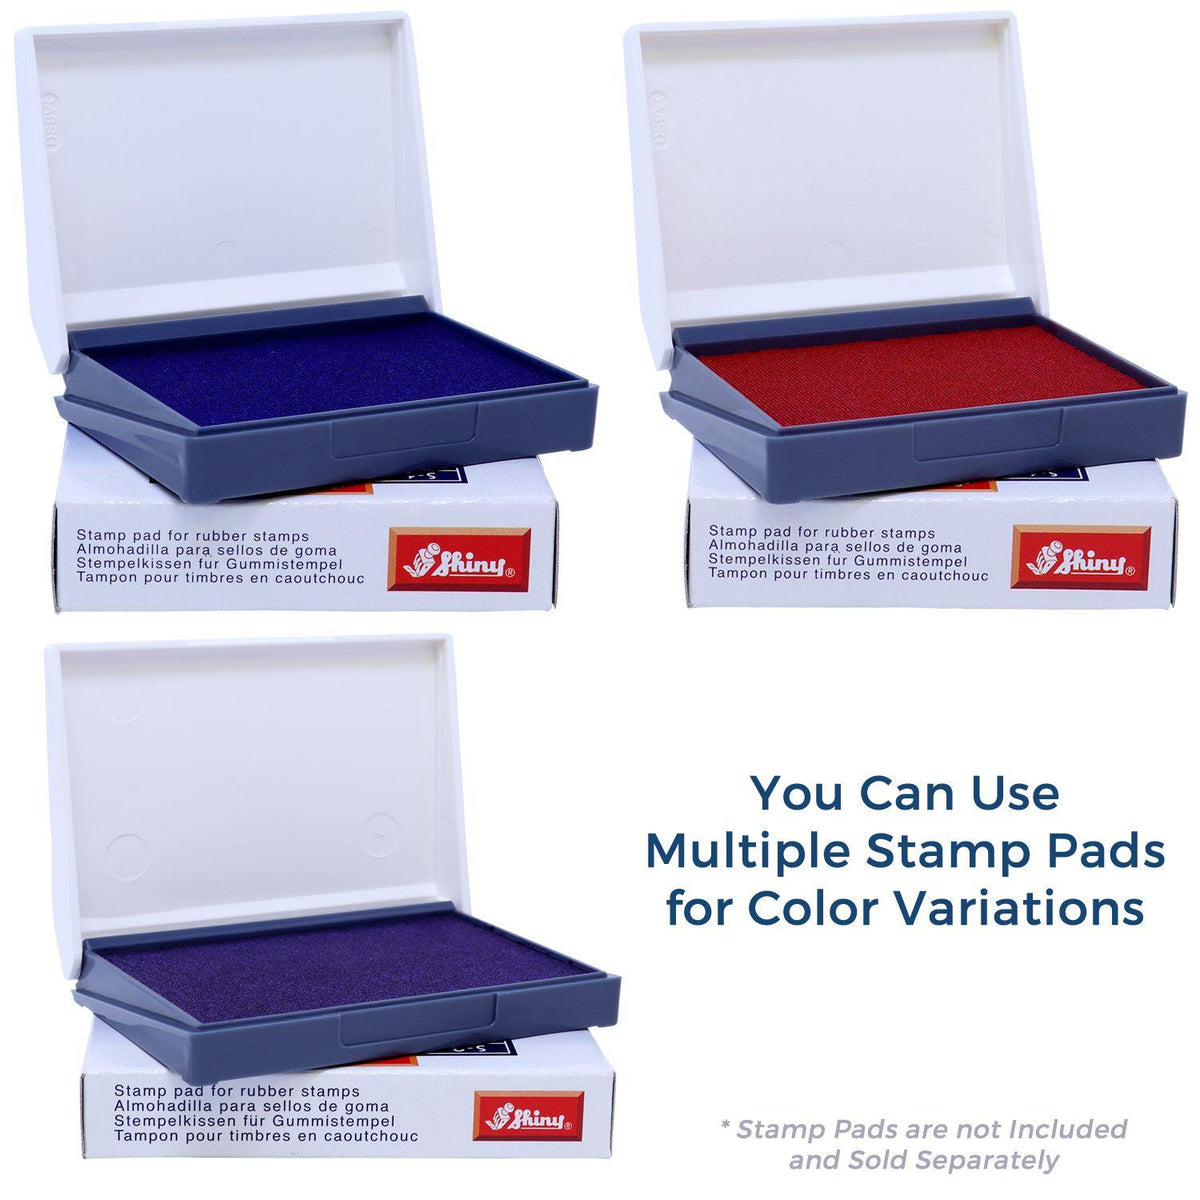 Stamp Pads for Large Refinance Rubber Stamp Available